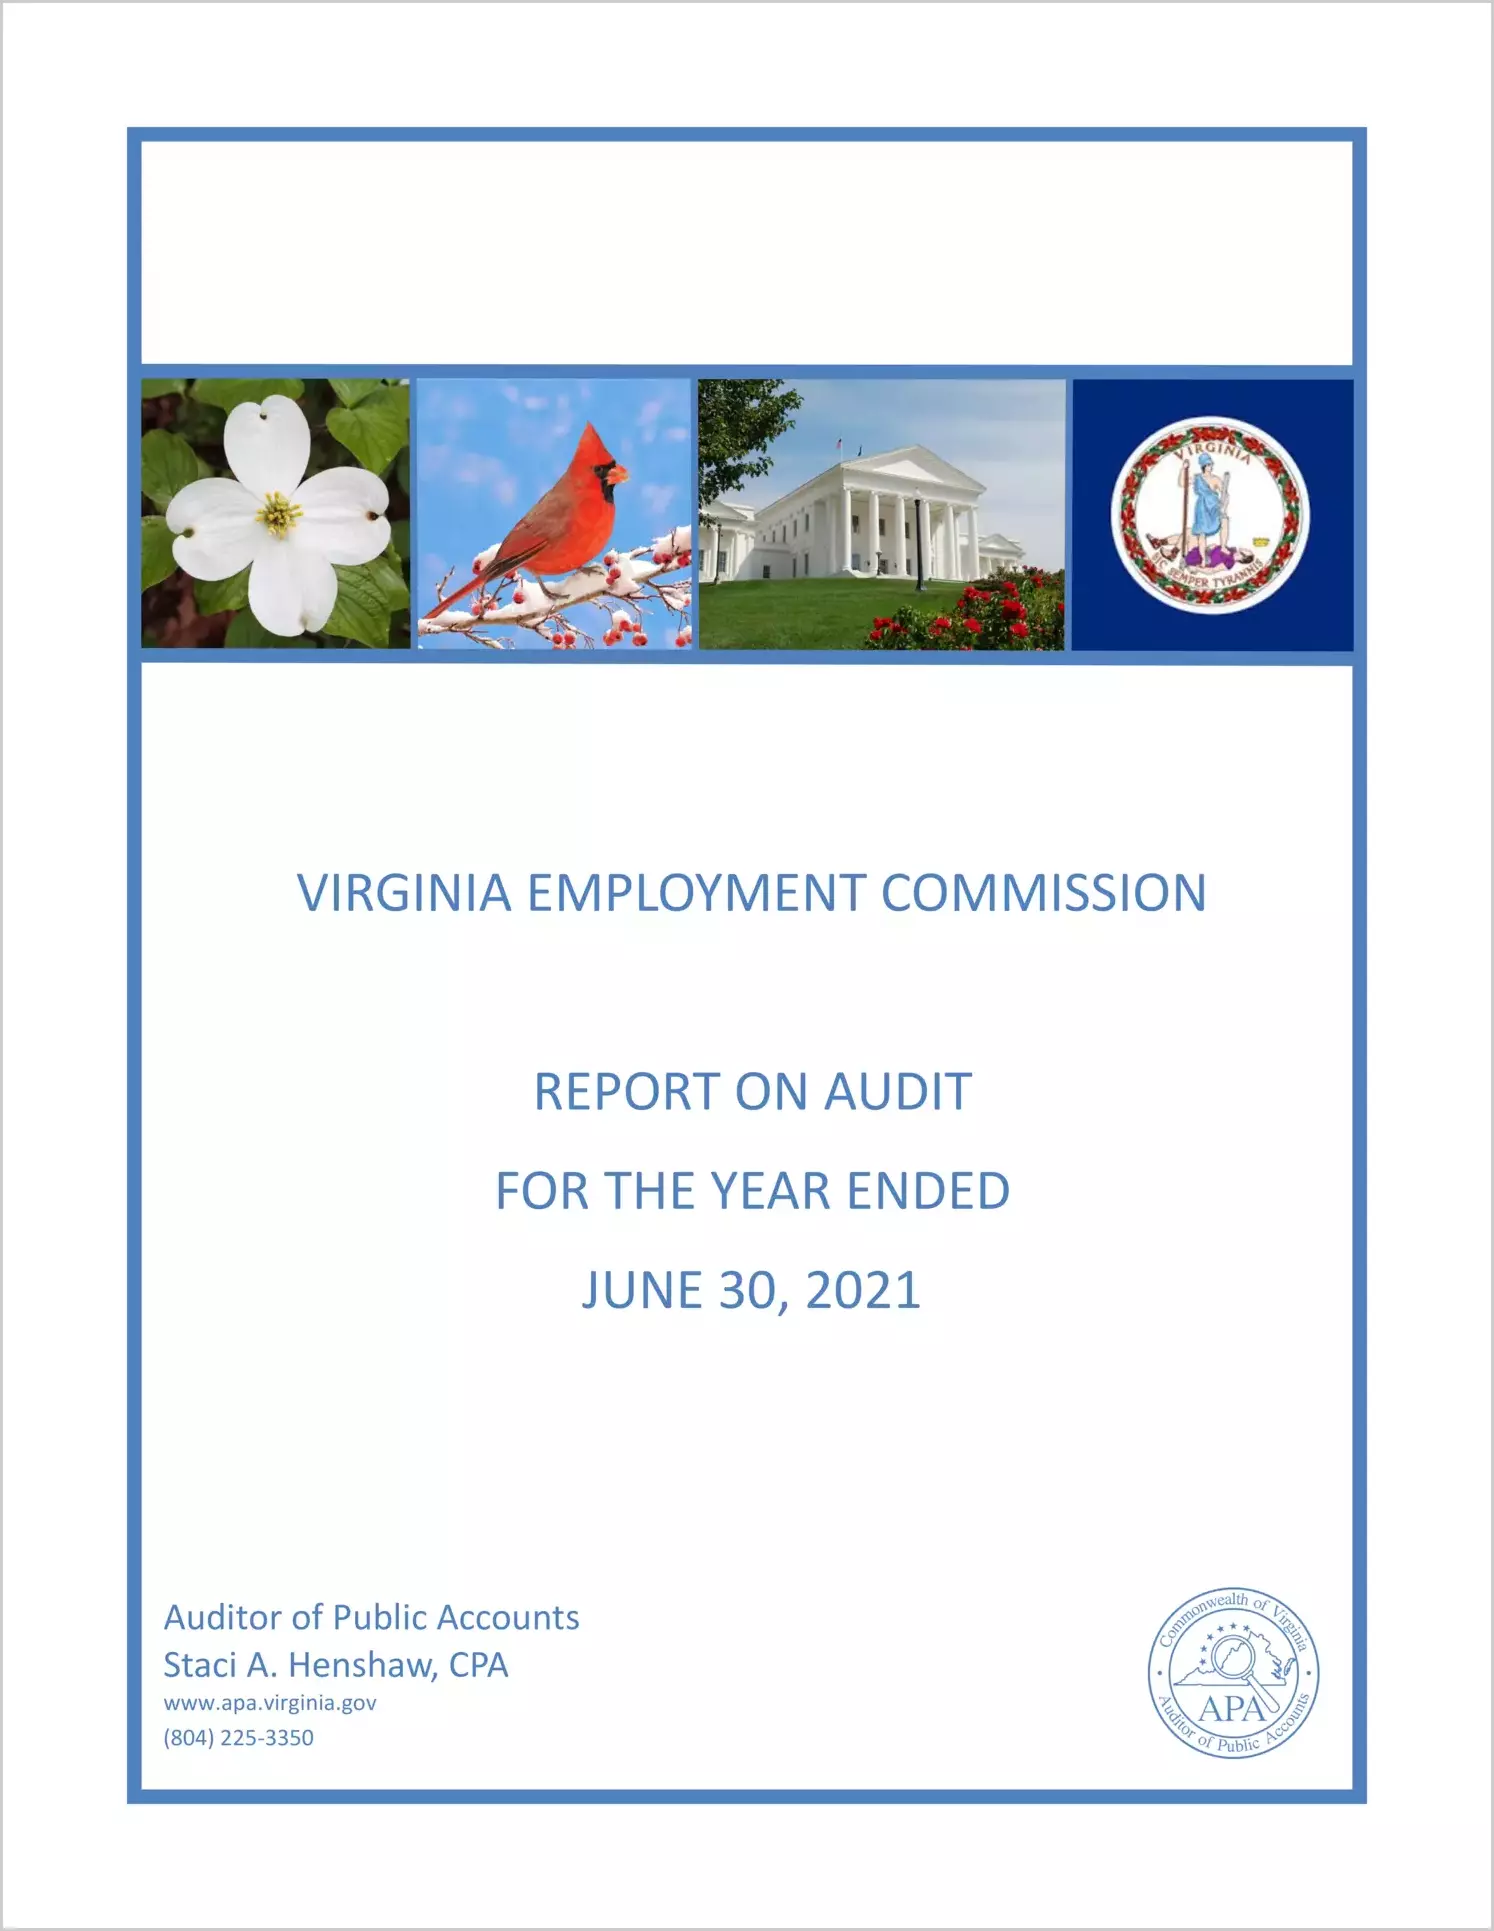 Virginia Employment Commission for the year ended June 30, 2021